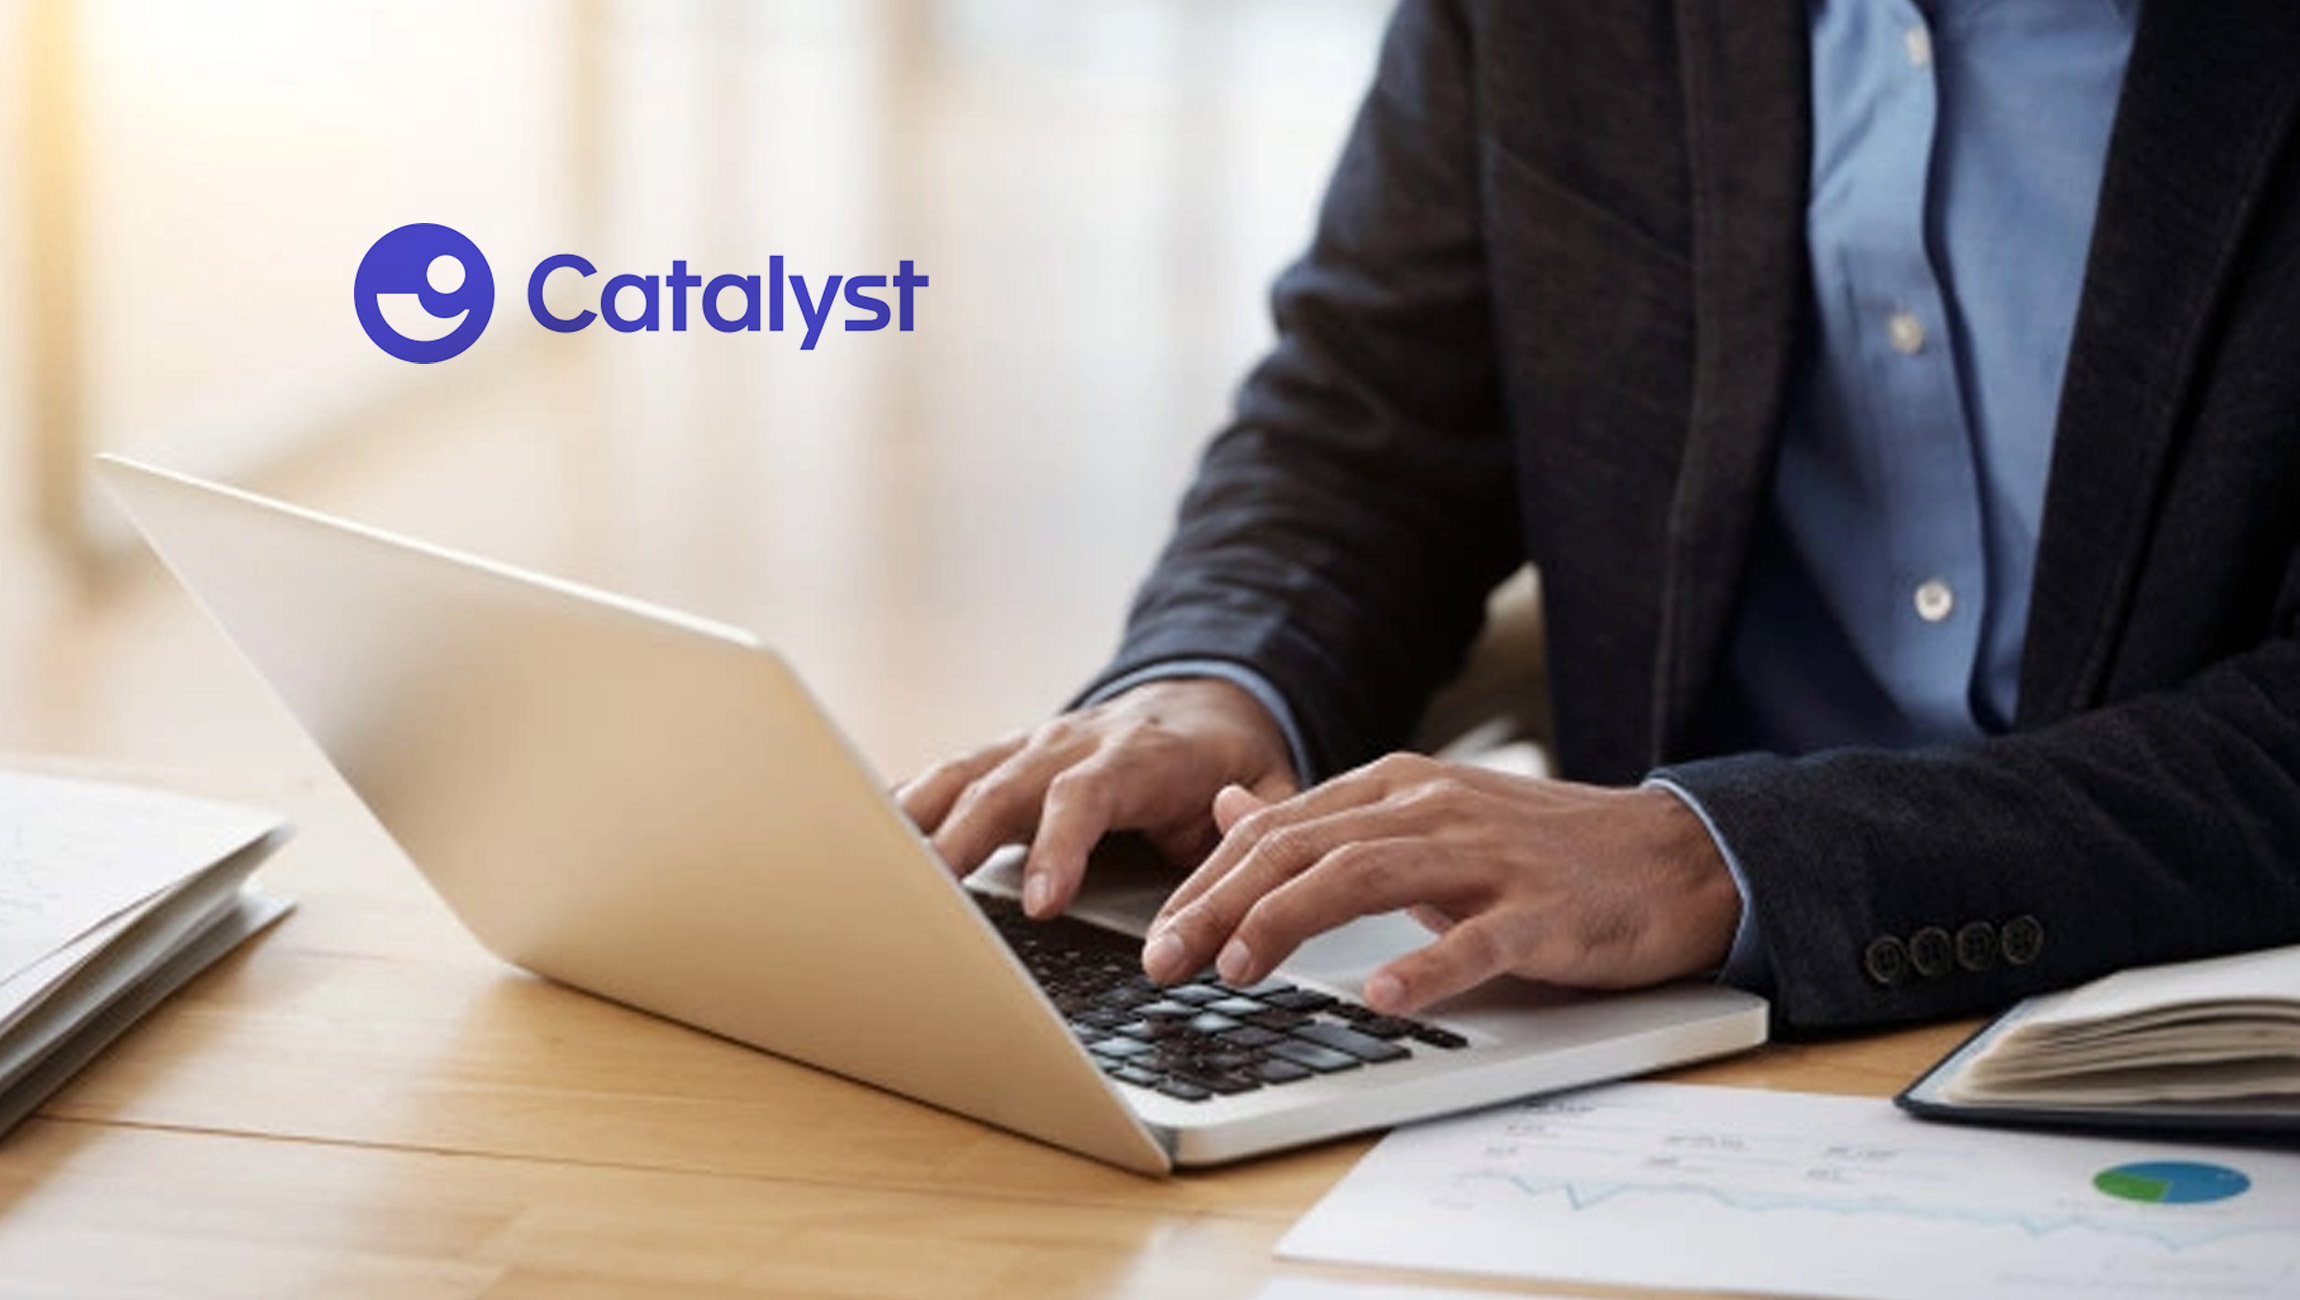 Catalyst Launches Customer Success at the Center Summit Featuring Top Tech Leaders